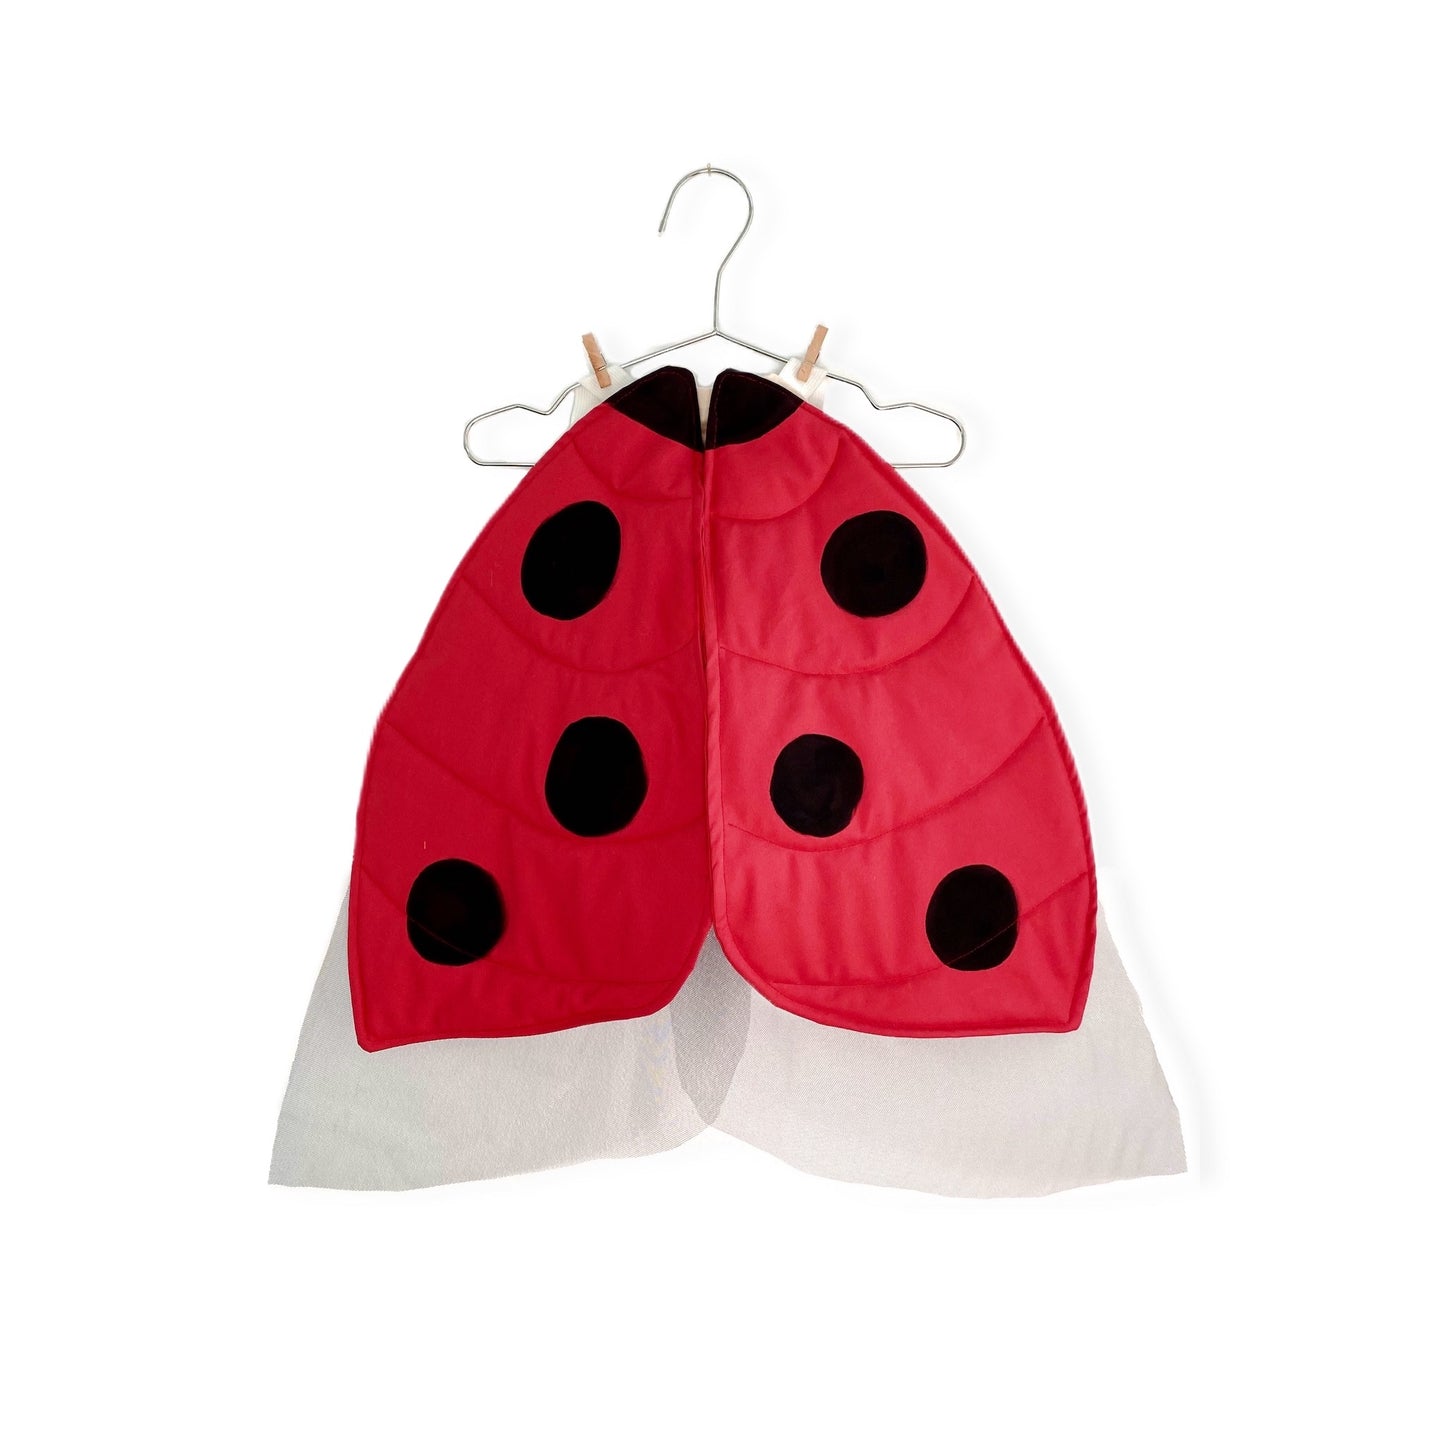 Ladybug costume for toddlers and children. 